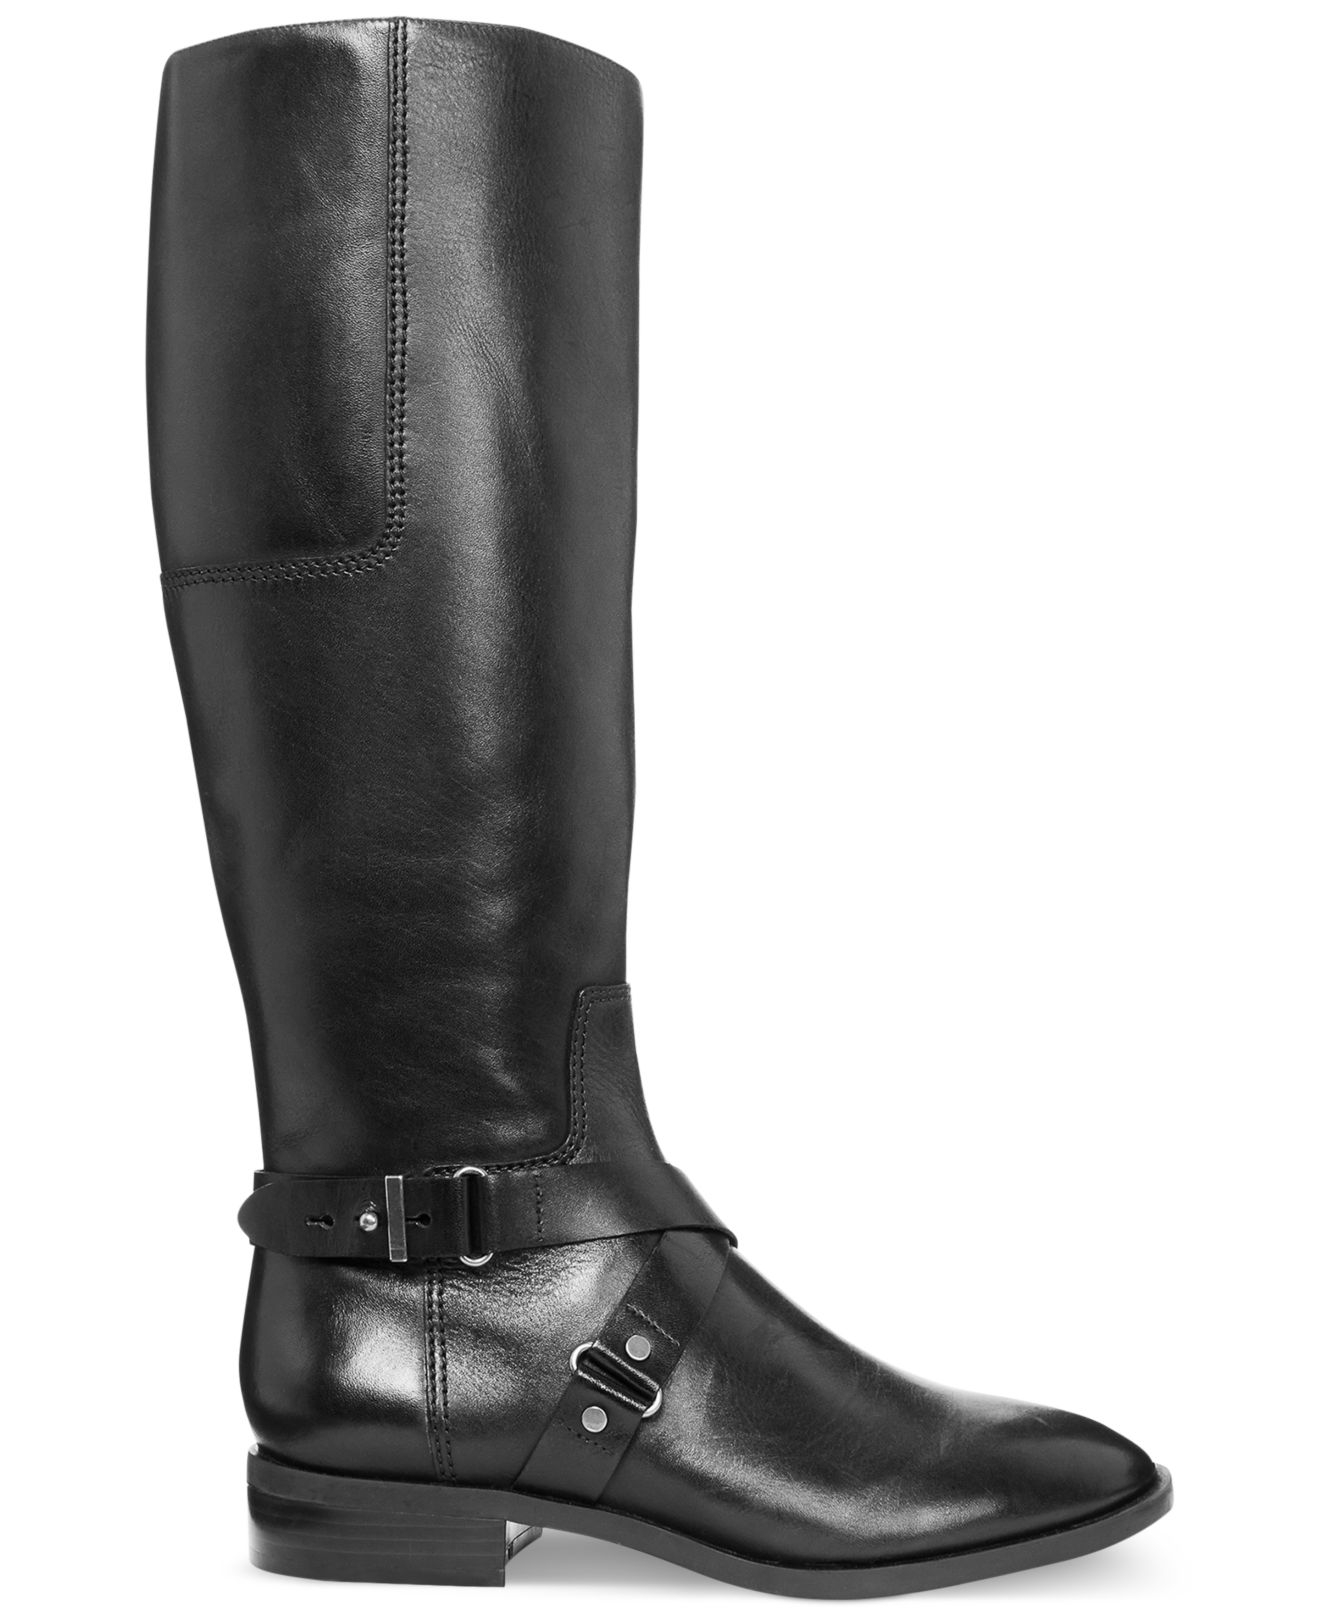 Lyst - Nine West Blogger Tall Riding Boots in Black